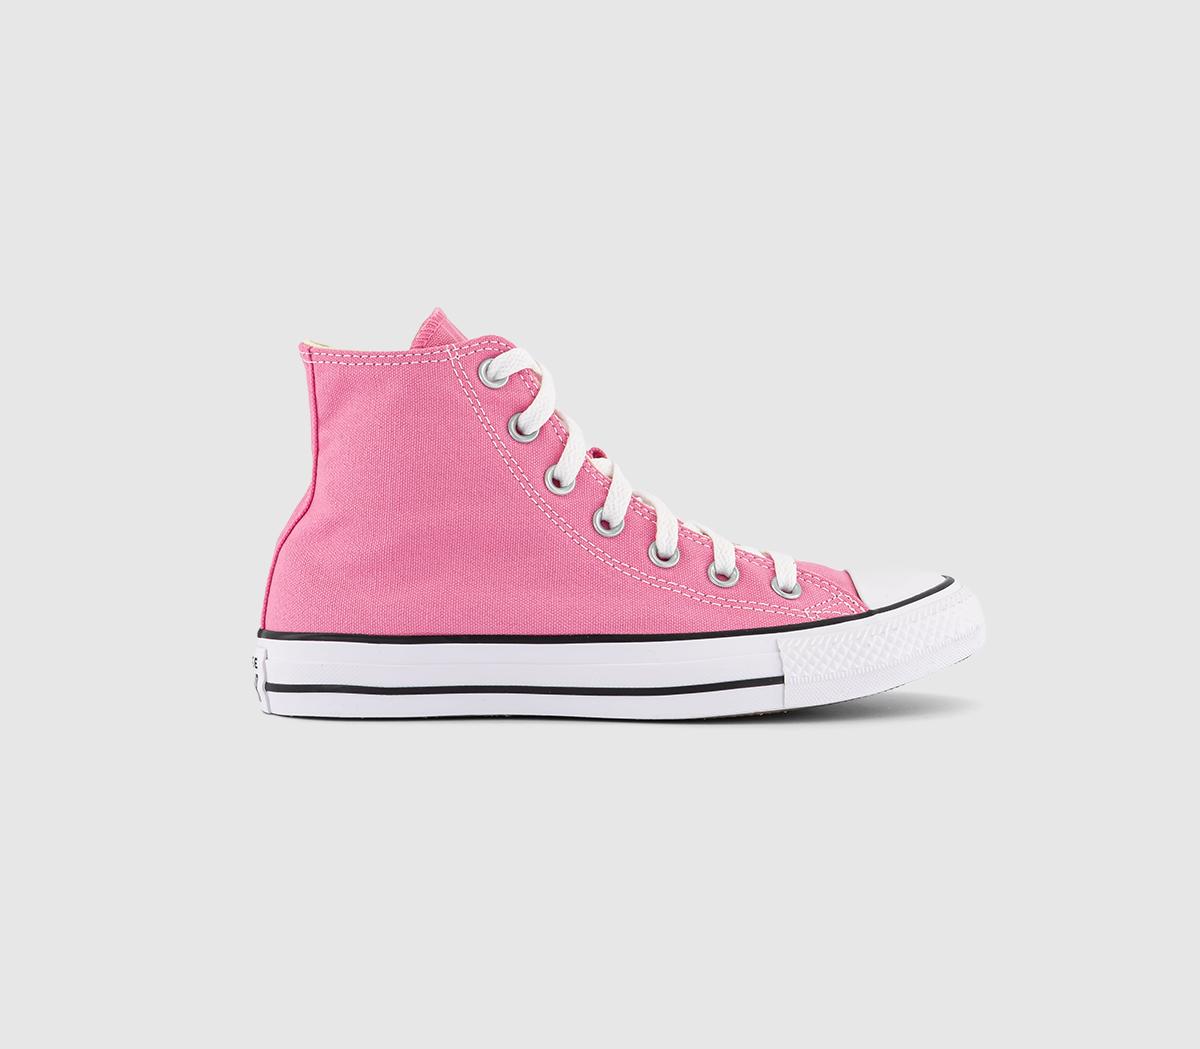 ConverseConverse All Star Hi TrainersPink Canvas